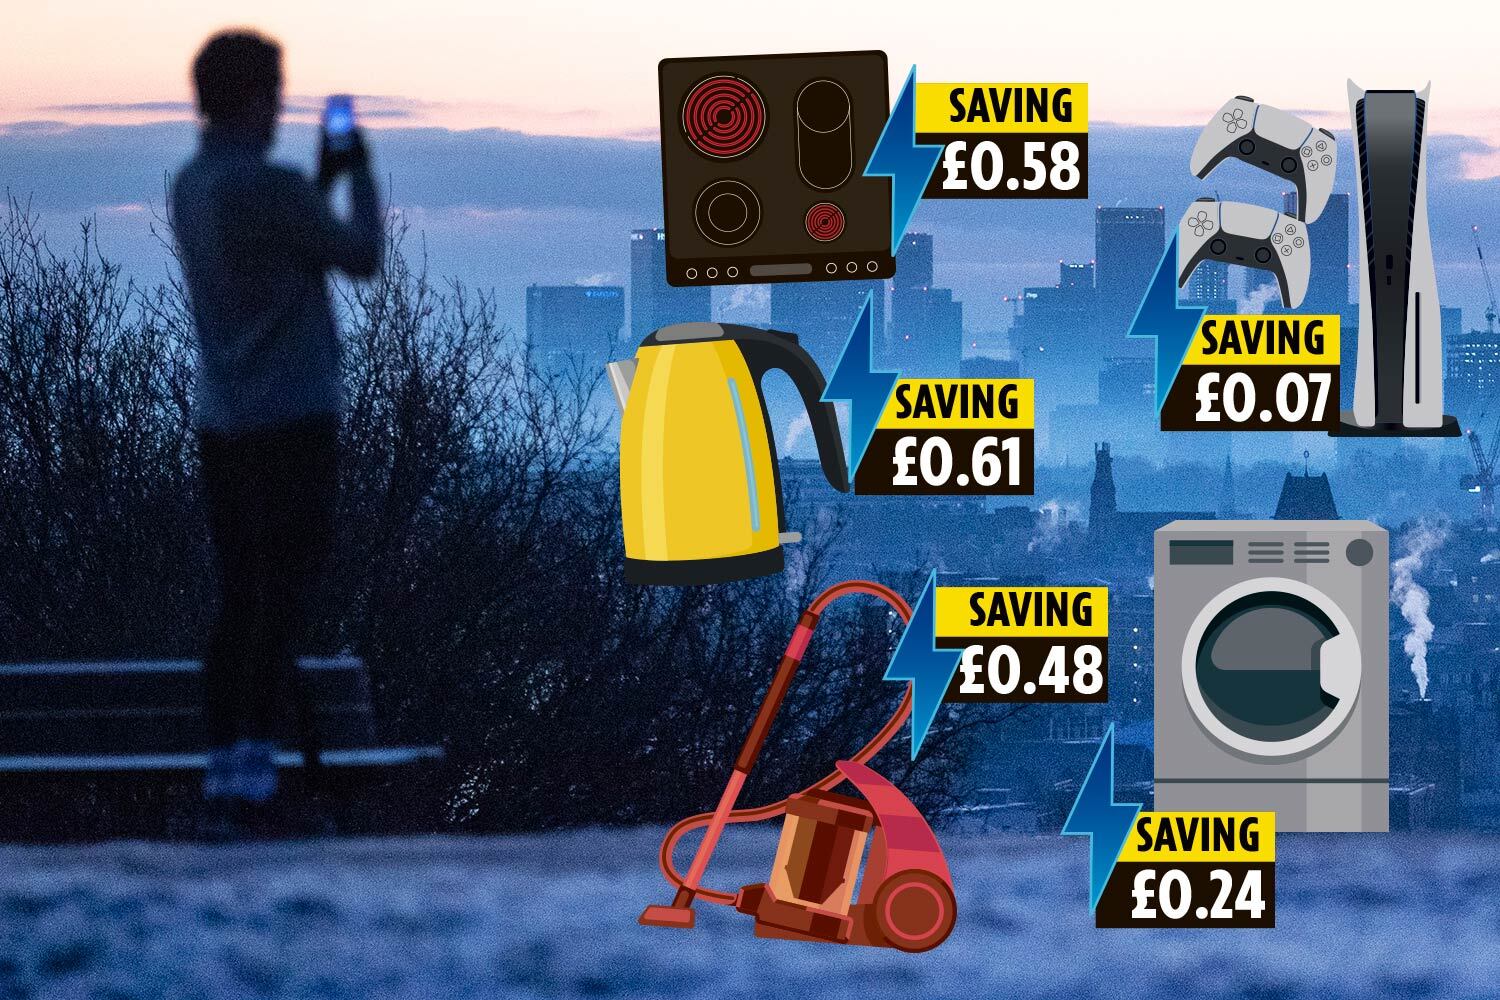 Households will be paid again today to cut power - could you save money?